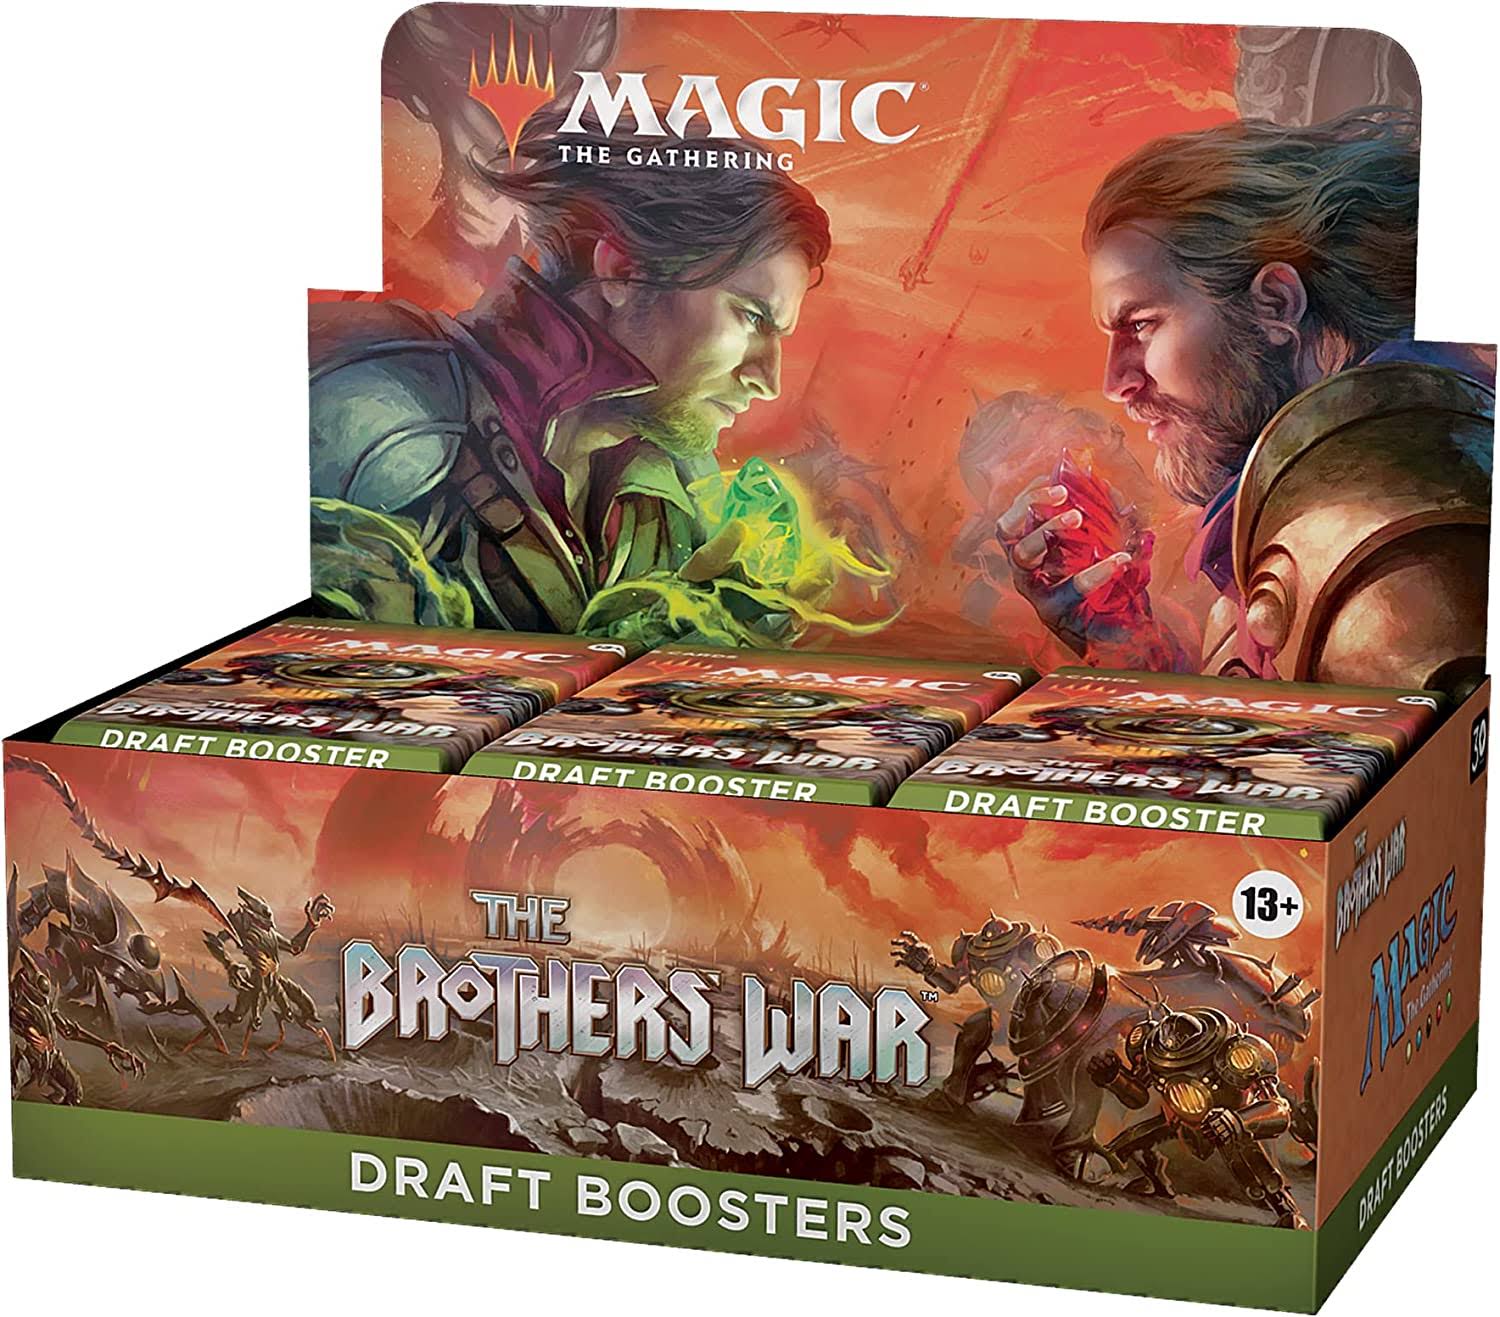 Magic: The Gathering The Brothers’ War Draft Booster Box, 36 Packs